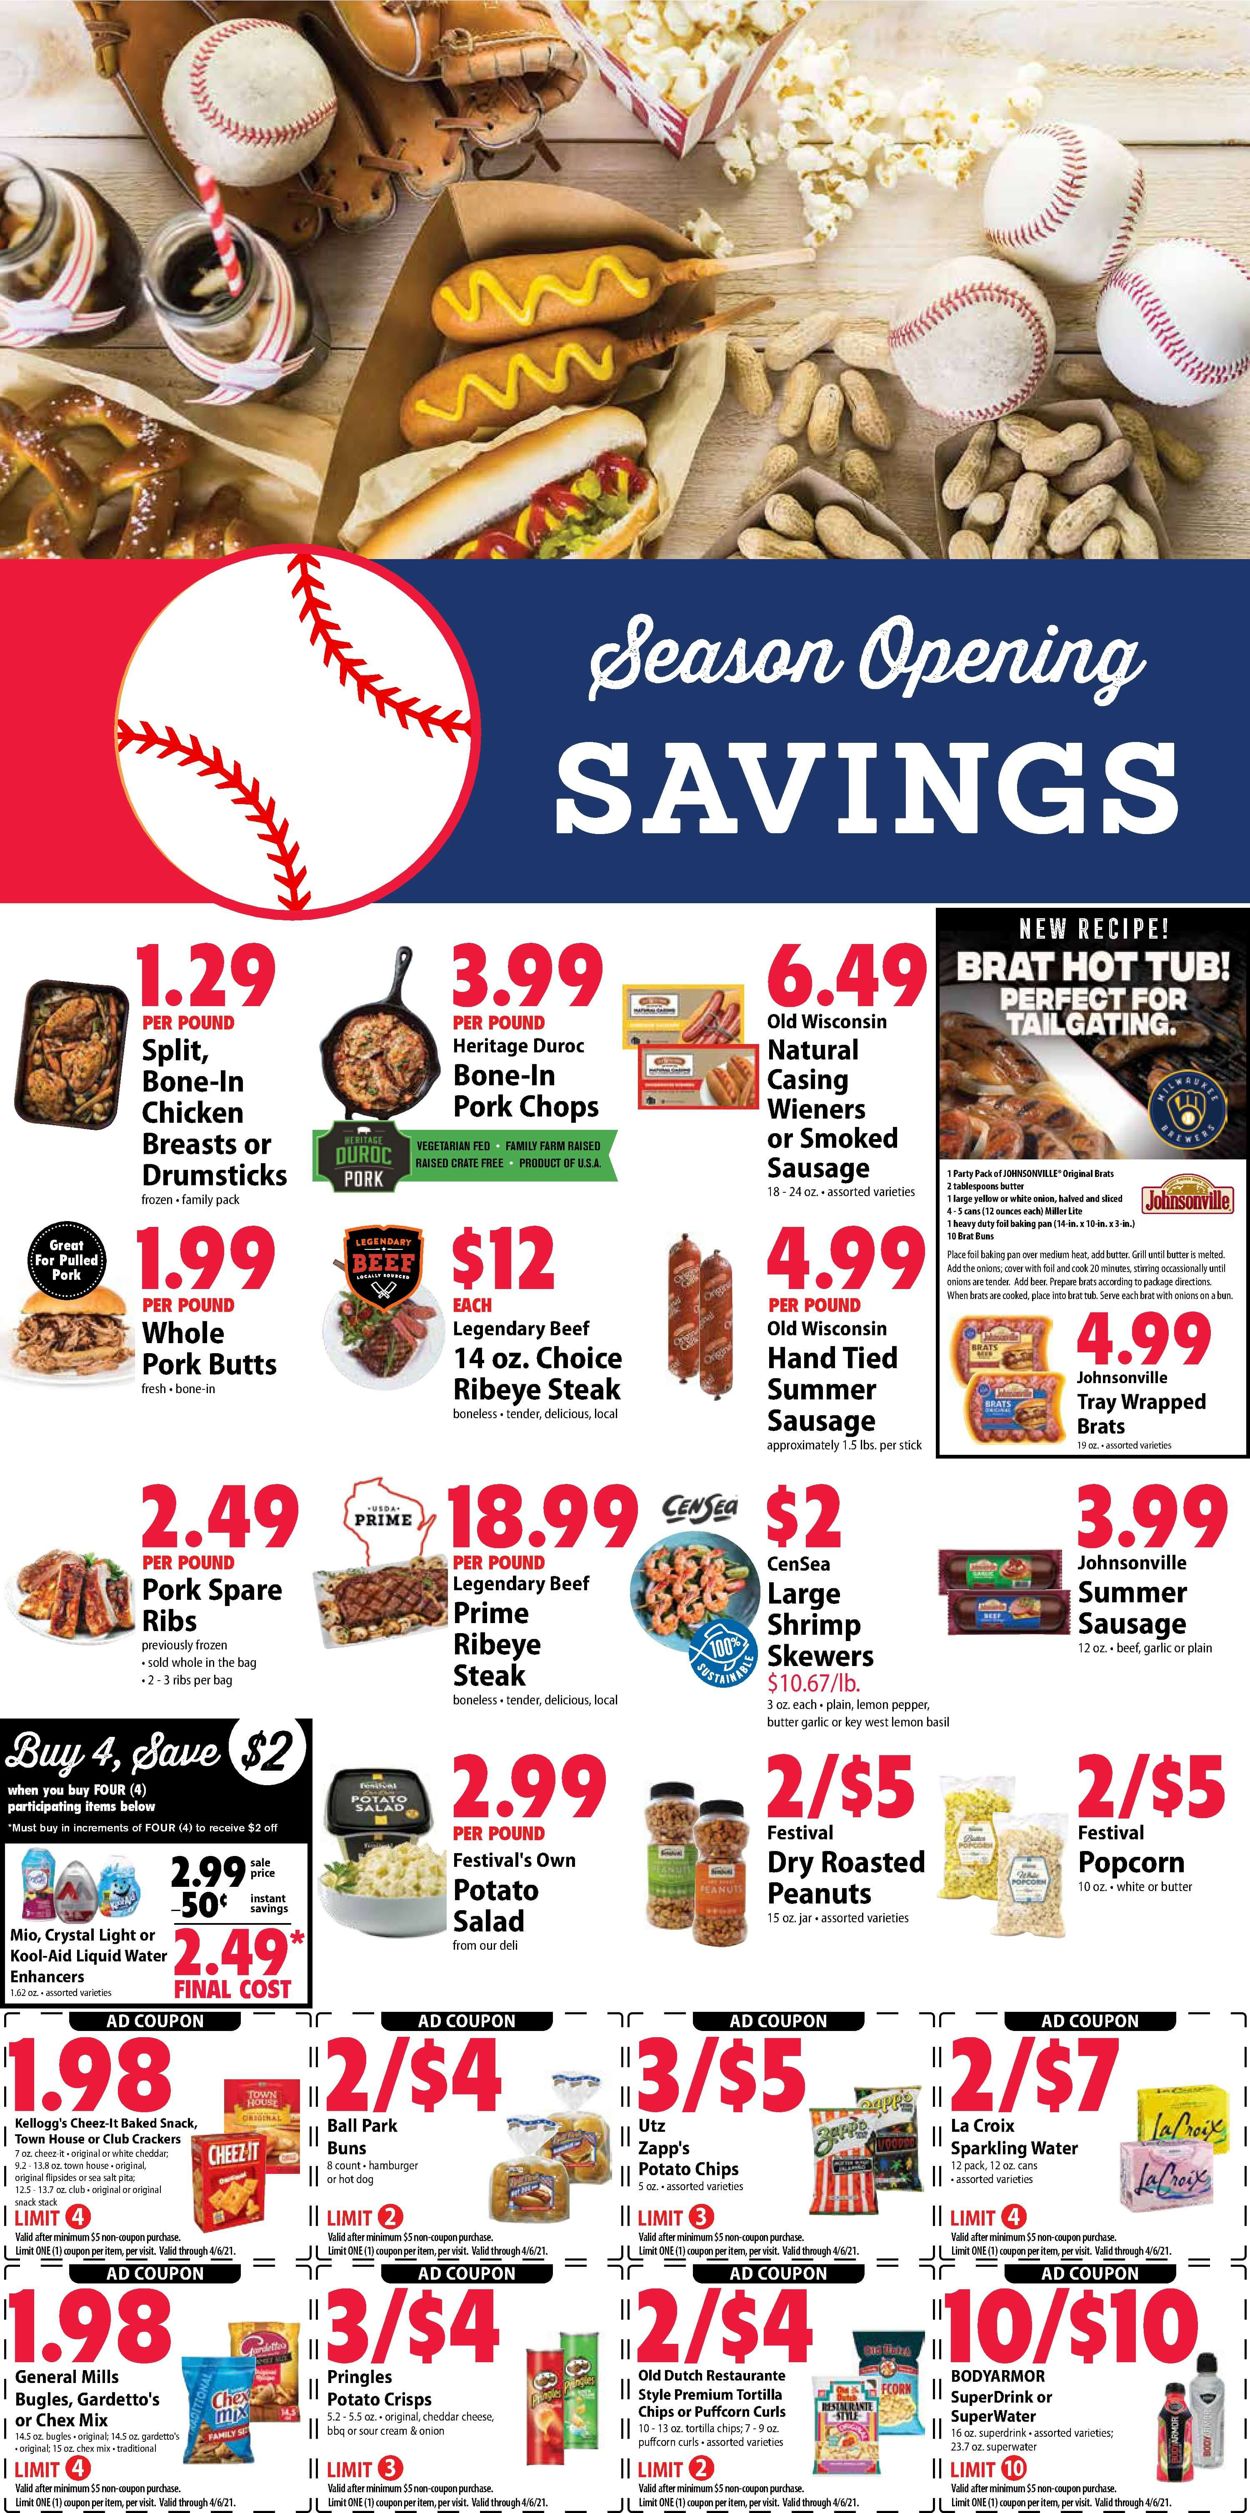 Festival Foods Easter 2021 ad Weekly Ad Circular - valid 03/31-04/06/2021 (Page 4)